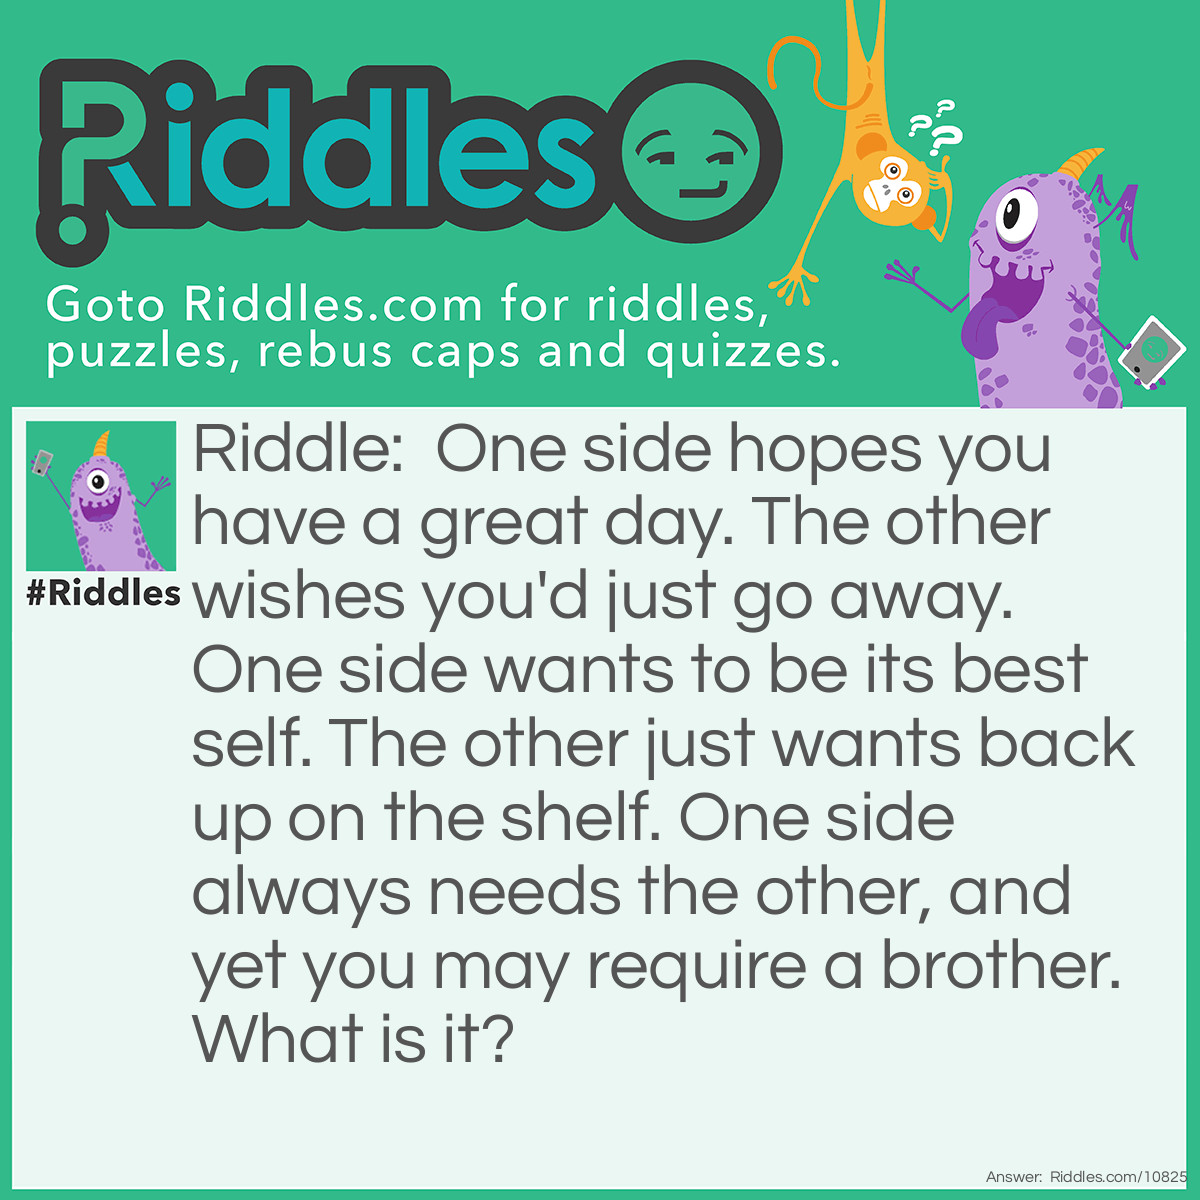 Riddle: One side hopes you have a great day. The other wishes you'd just go away. One side wants to be its best self. The other just wants back up on the shelf. One side always needs the other, and yet you may require a brother. What is it? Answer: A battery. One side is positive and the other is negative. Most devices need at least a pair of batteries.